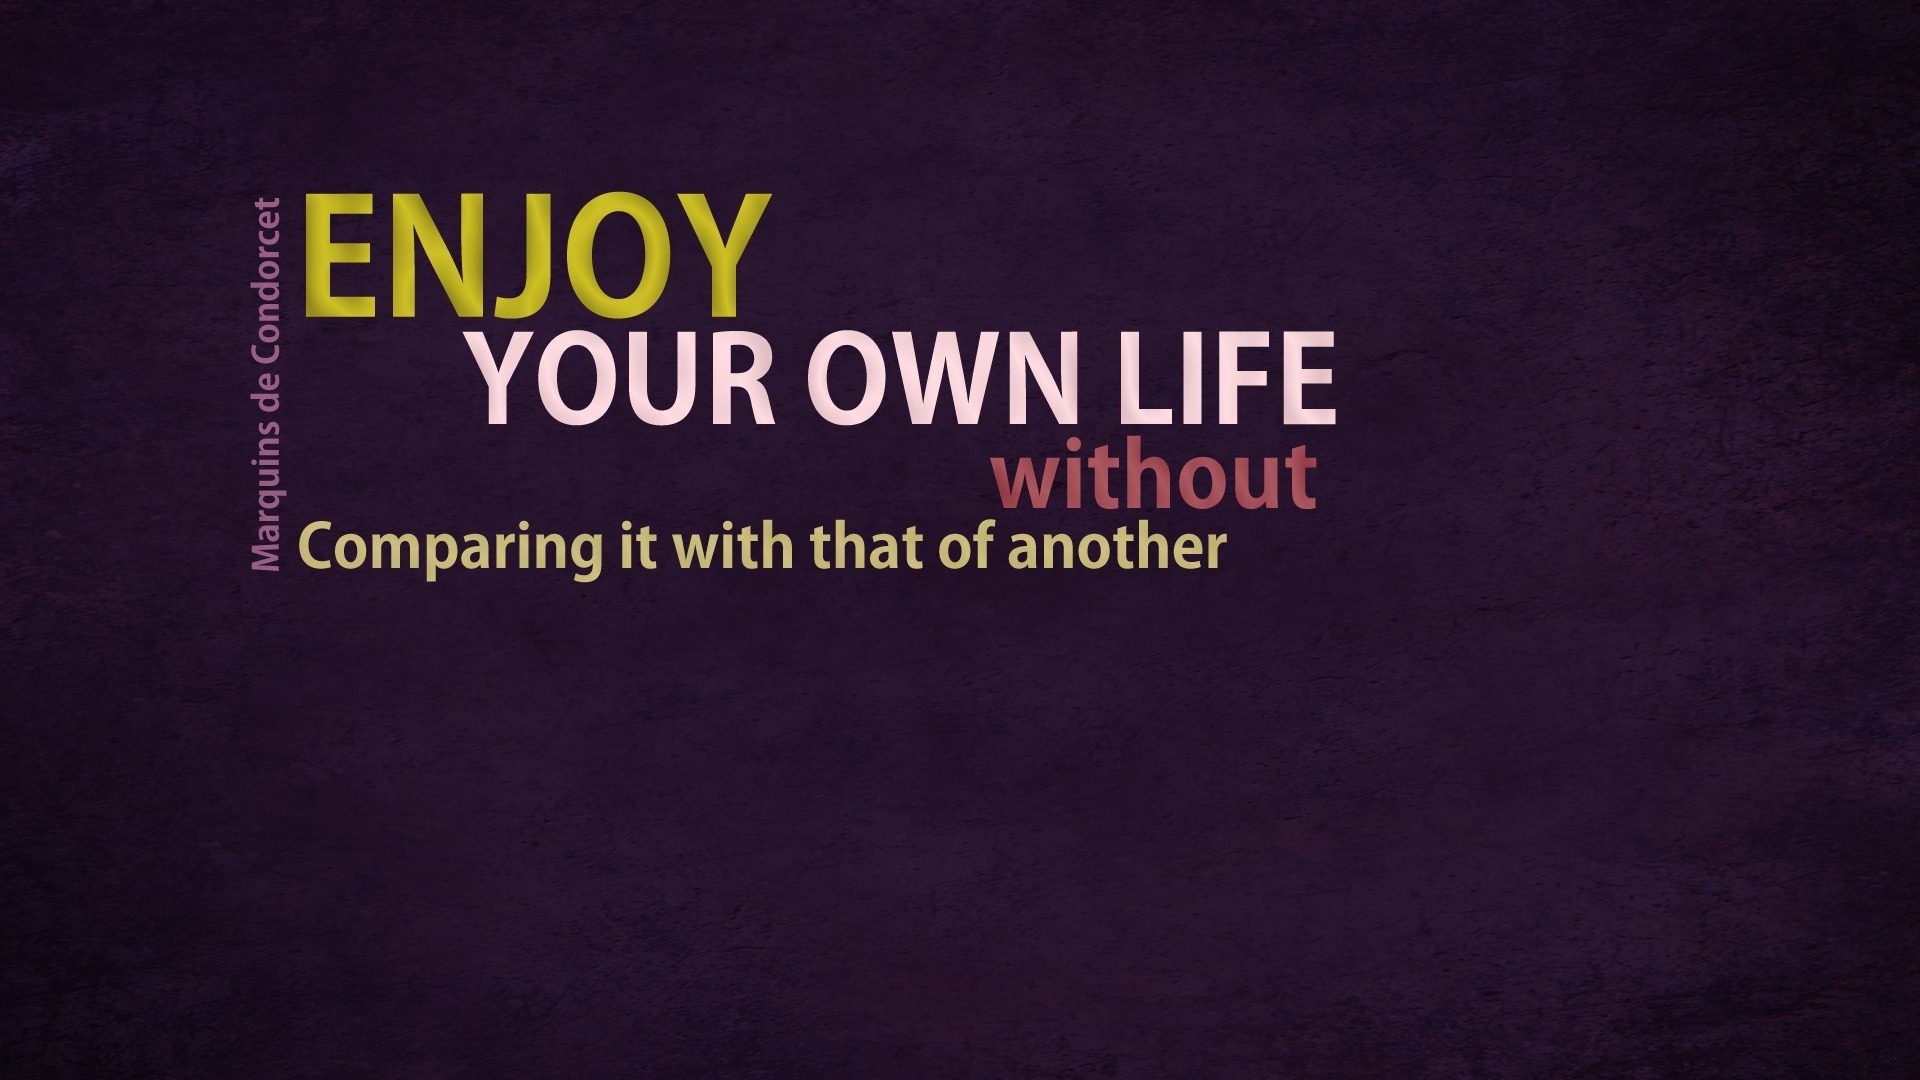 hd desktop wallpapers with life quotes-2 - HD Widescreen Wallpapers